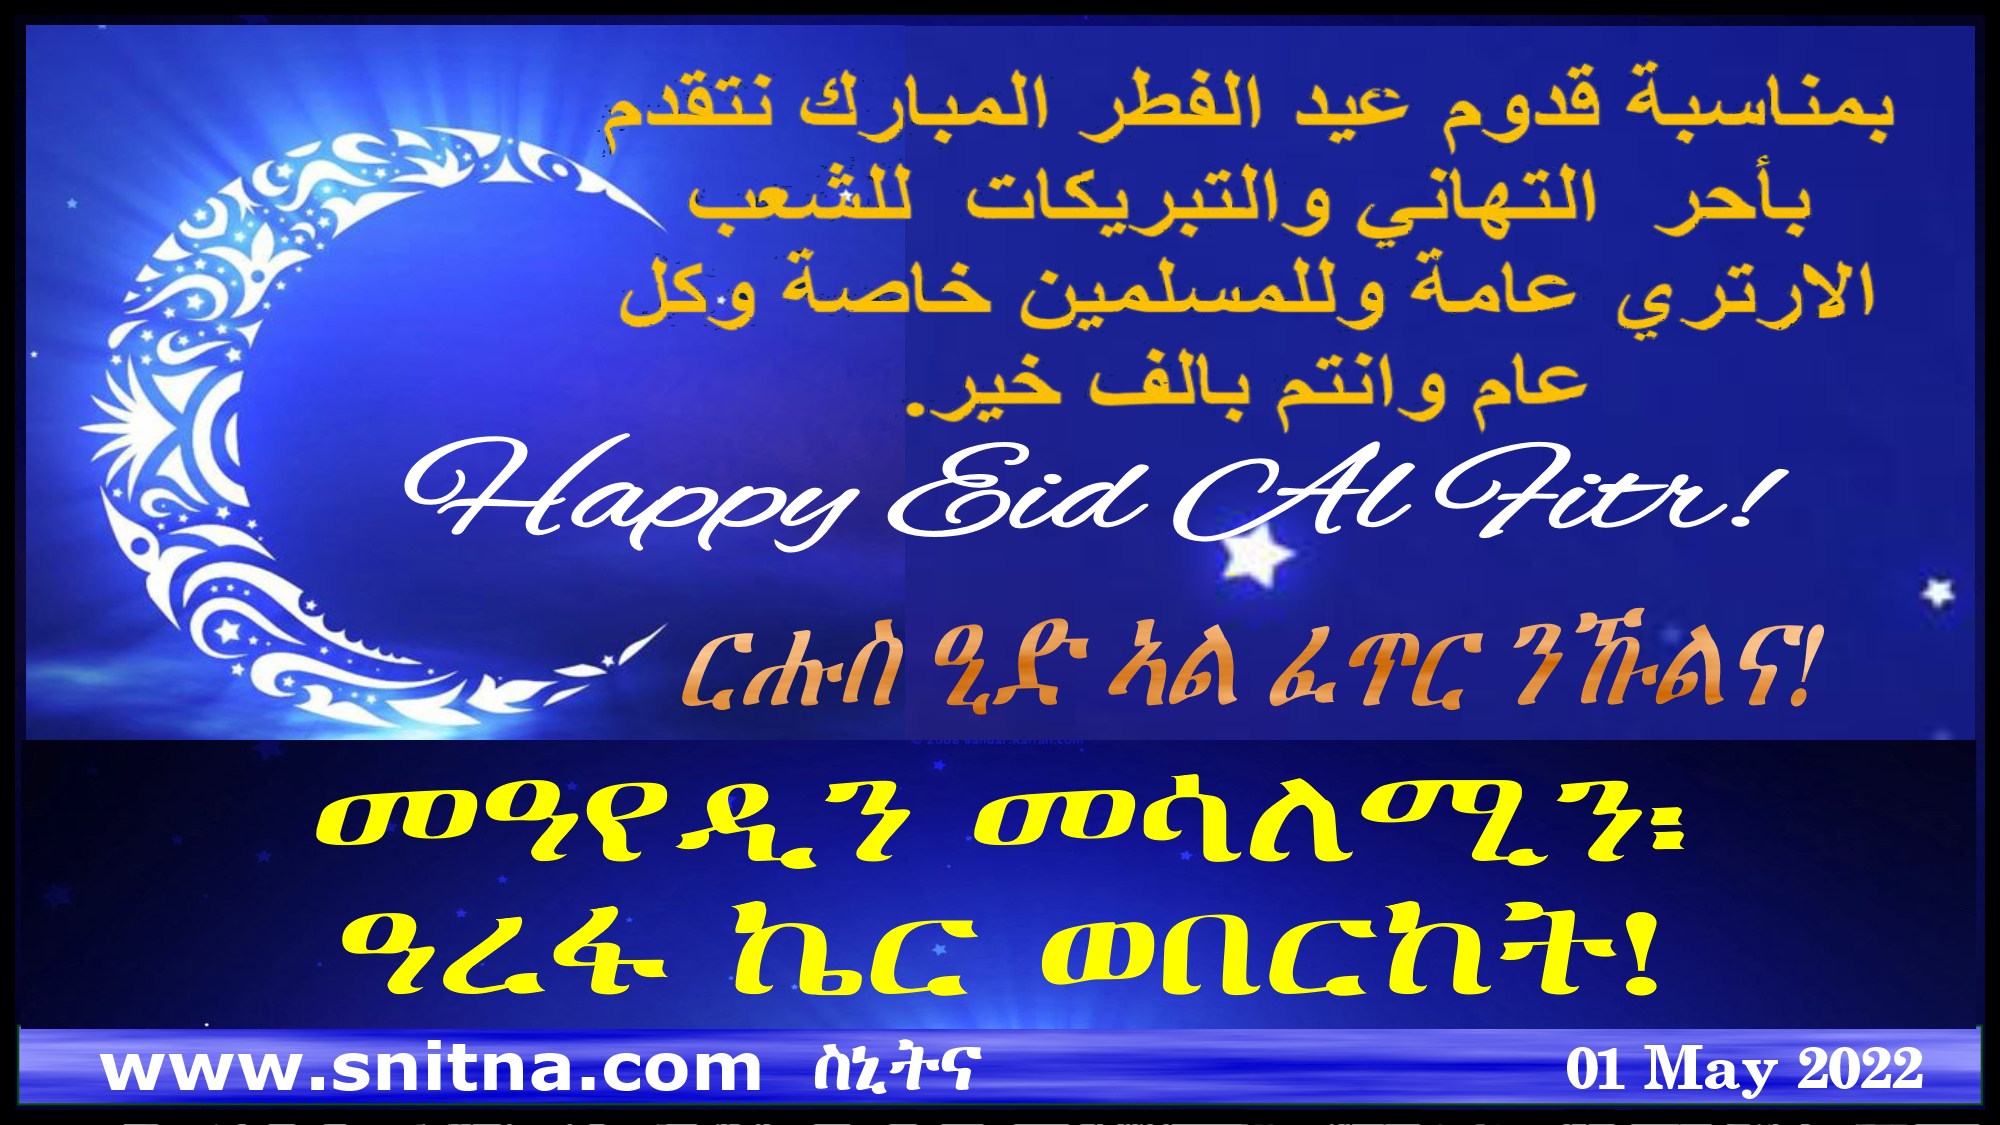 Happy Eid Al Fitr to All! from snitna.com.